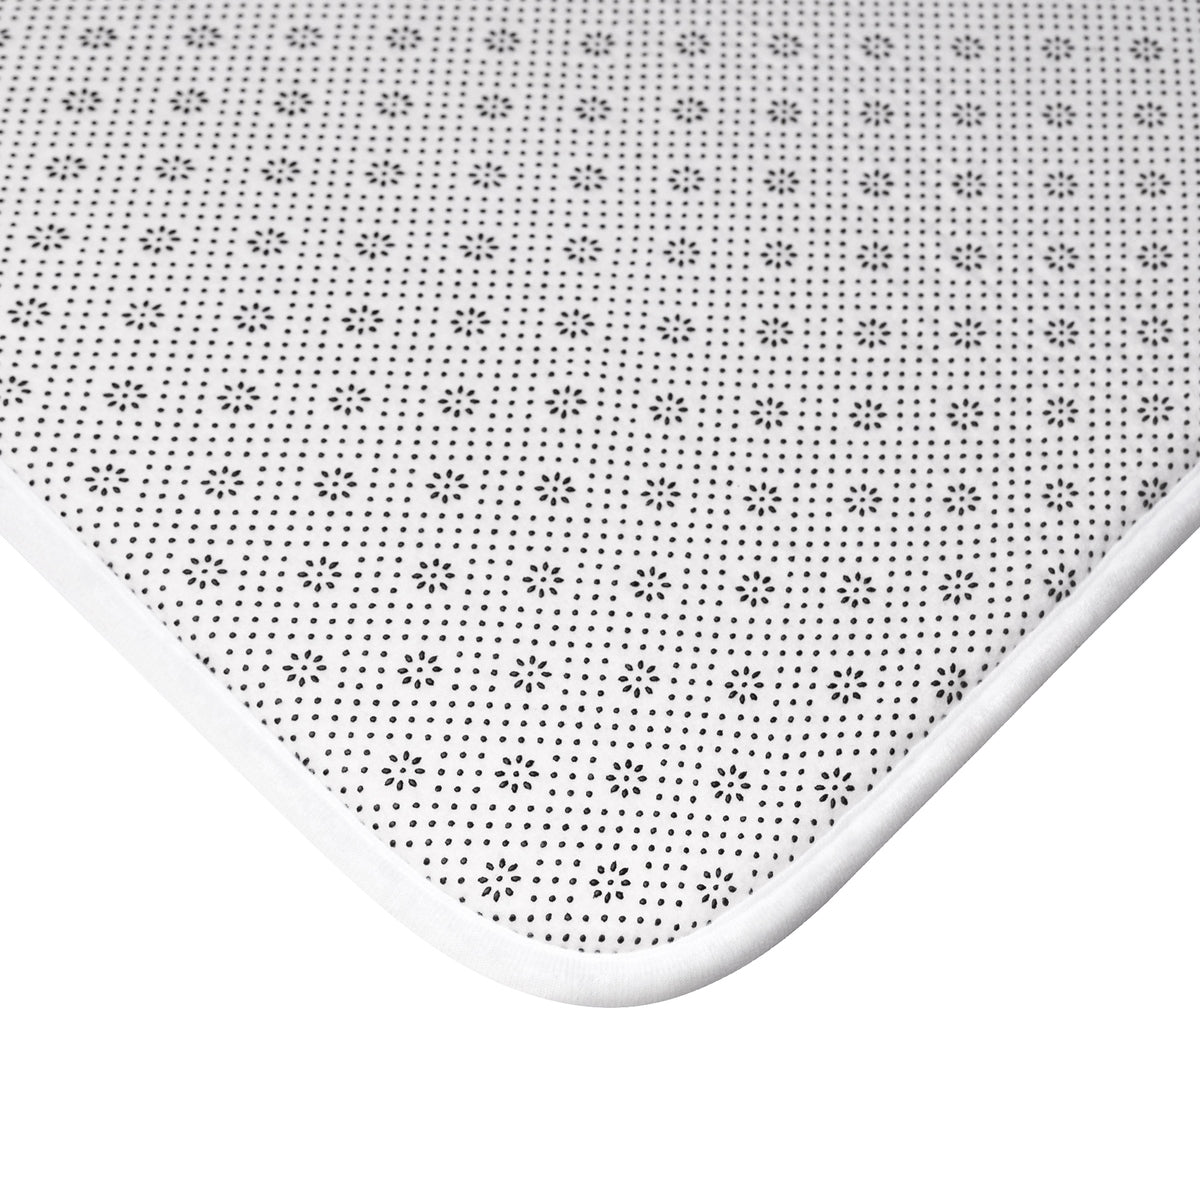 THE CABOODLE FLOOR MAT